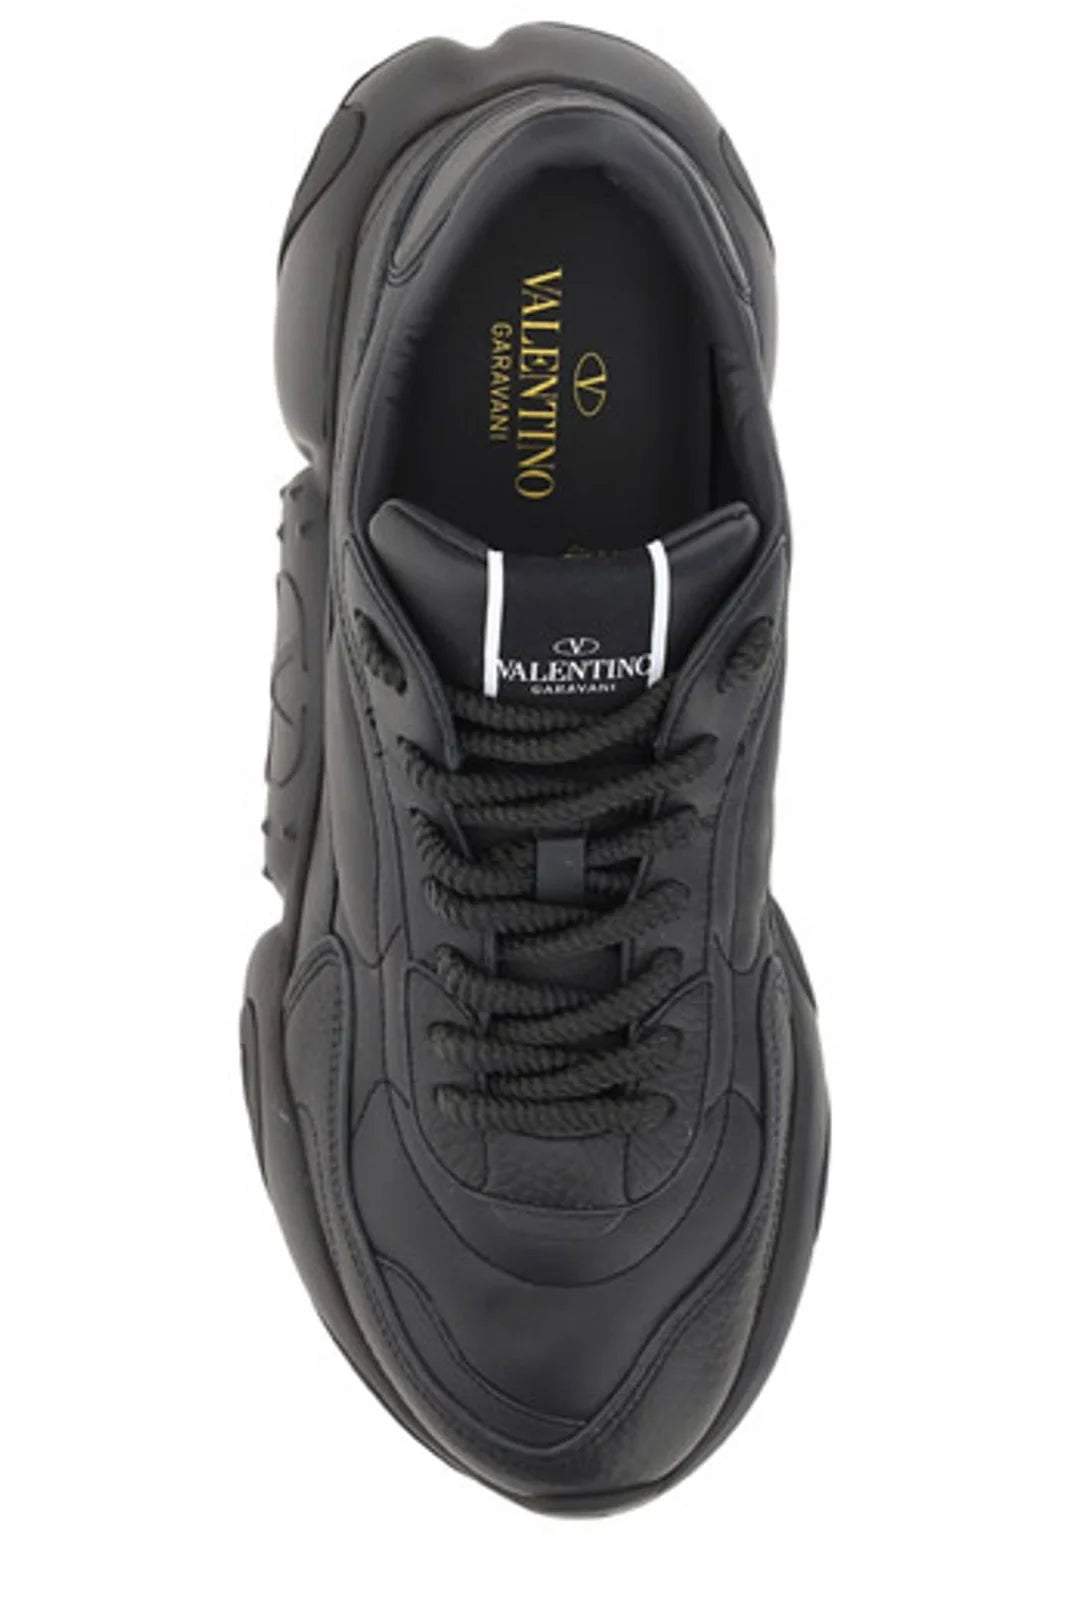 Valentino Black Calf Leather Garavani Sneakers #men, Black, EU40/US7, EU41/US8, EU42/US9, EU44/US11, feed-agegroup-adult, feed-color-Black, feed-gender-male, Men - New Arrivals, Sneakers - Men - Shoes, Valentino at SEYMAYKA